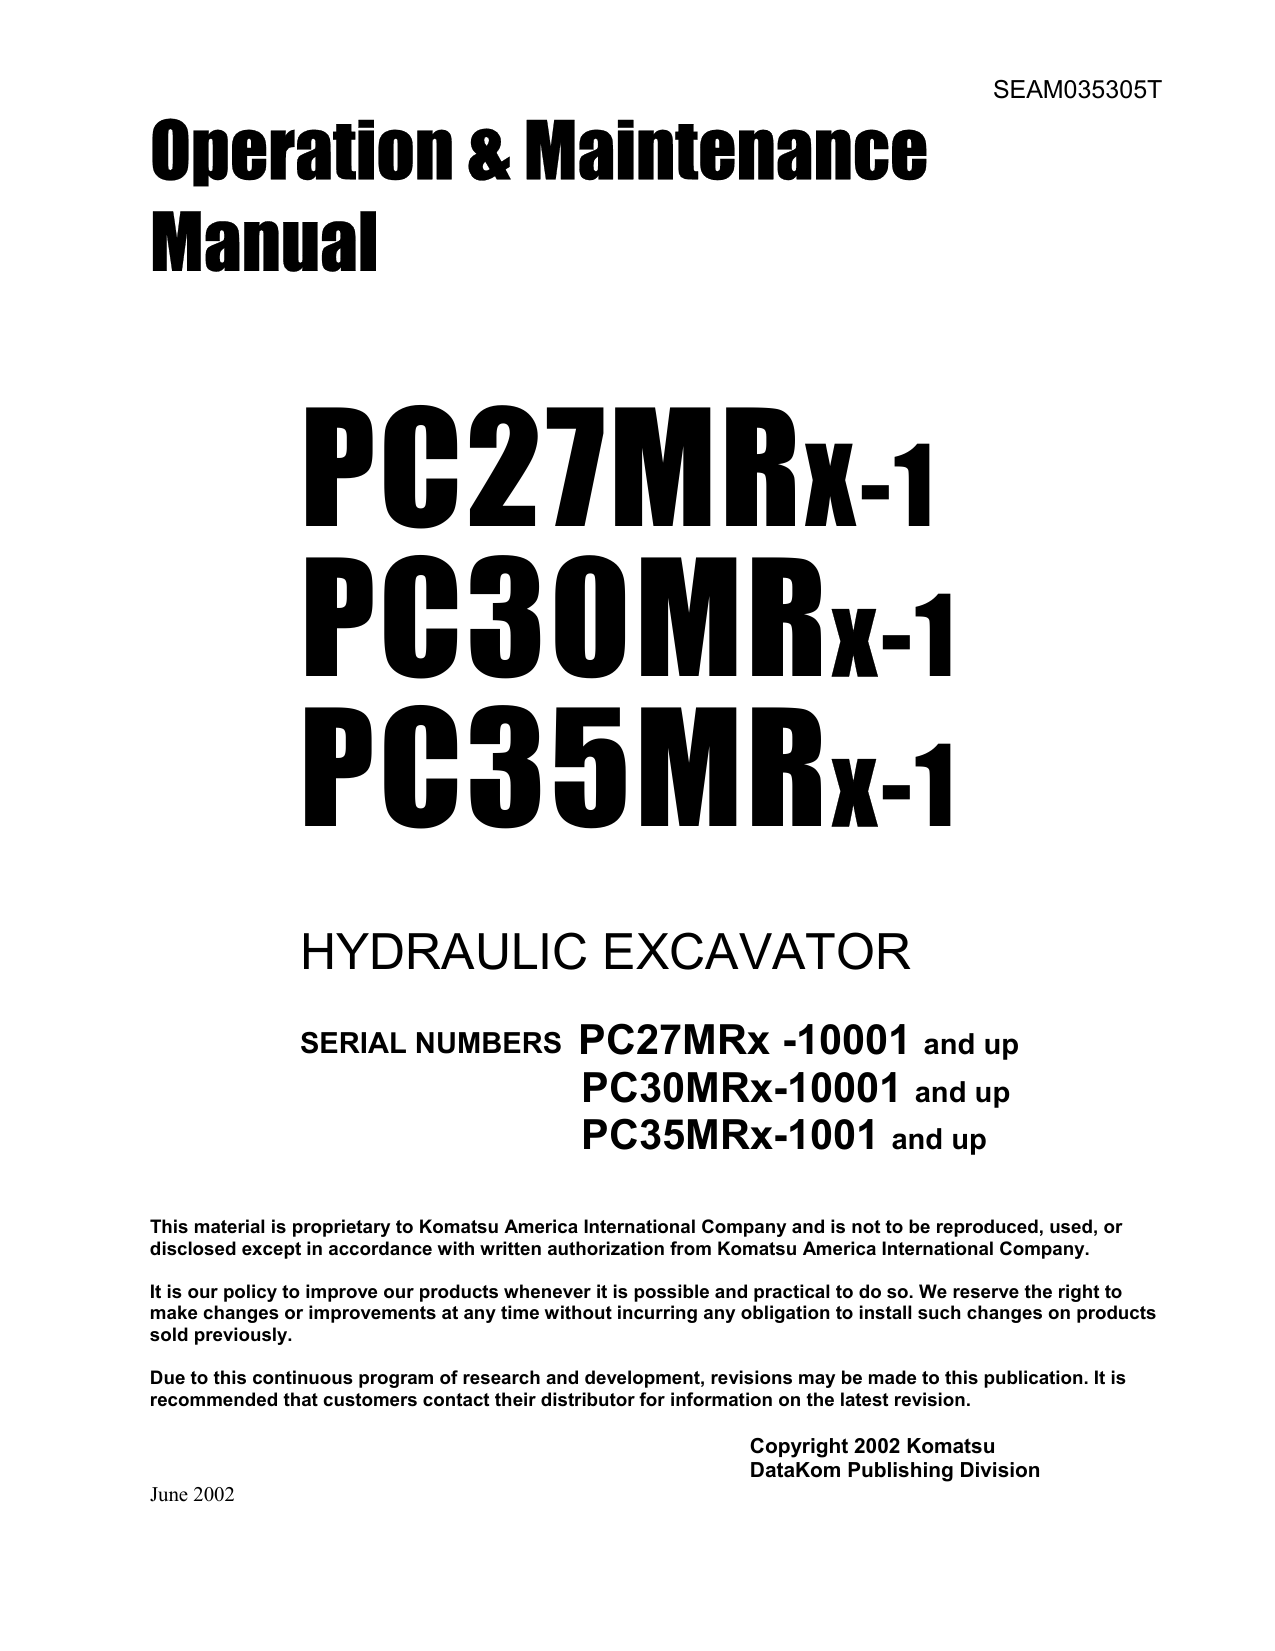 Komatsu PC27MR, PC27MRX-1, PC30MR, PC30MRX-1, PC35MR, PC35MRX-1 hydraulic excavator operation manual Preview image 2